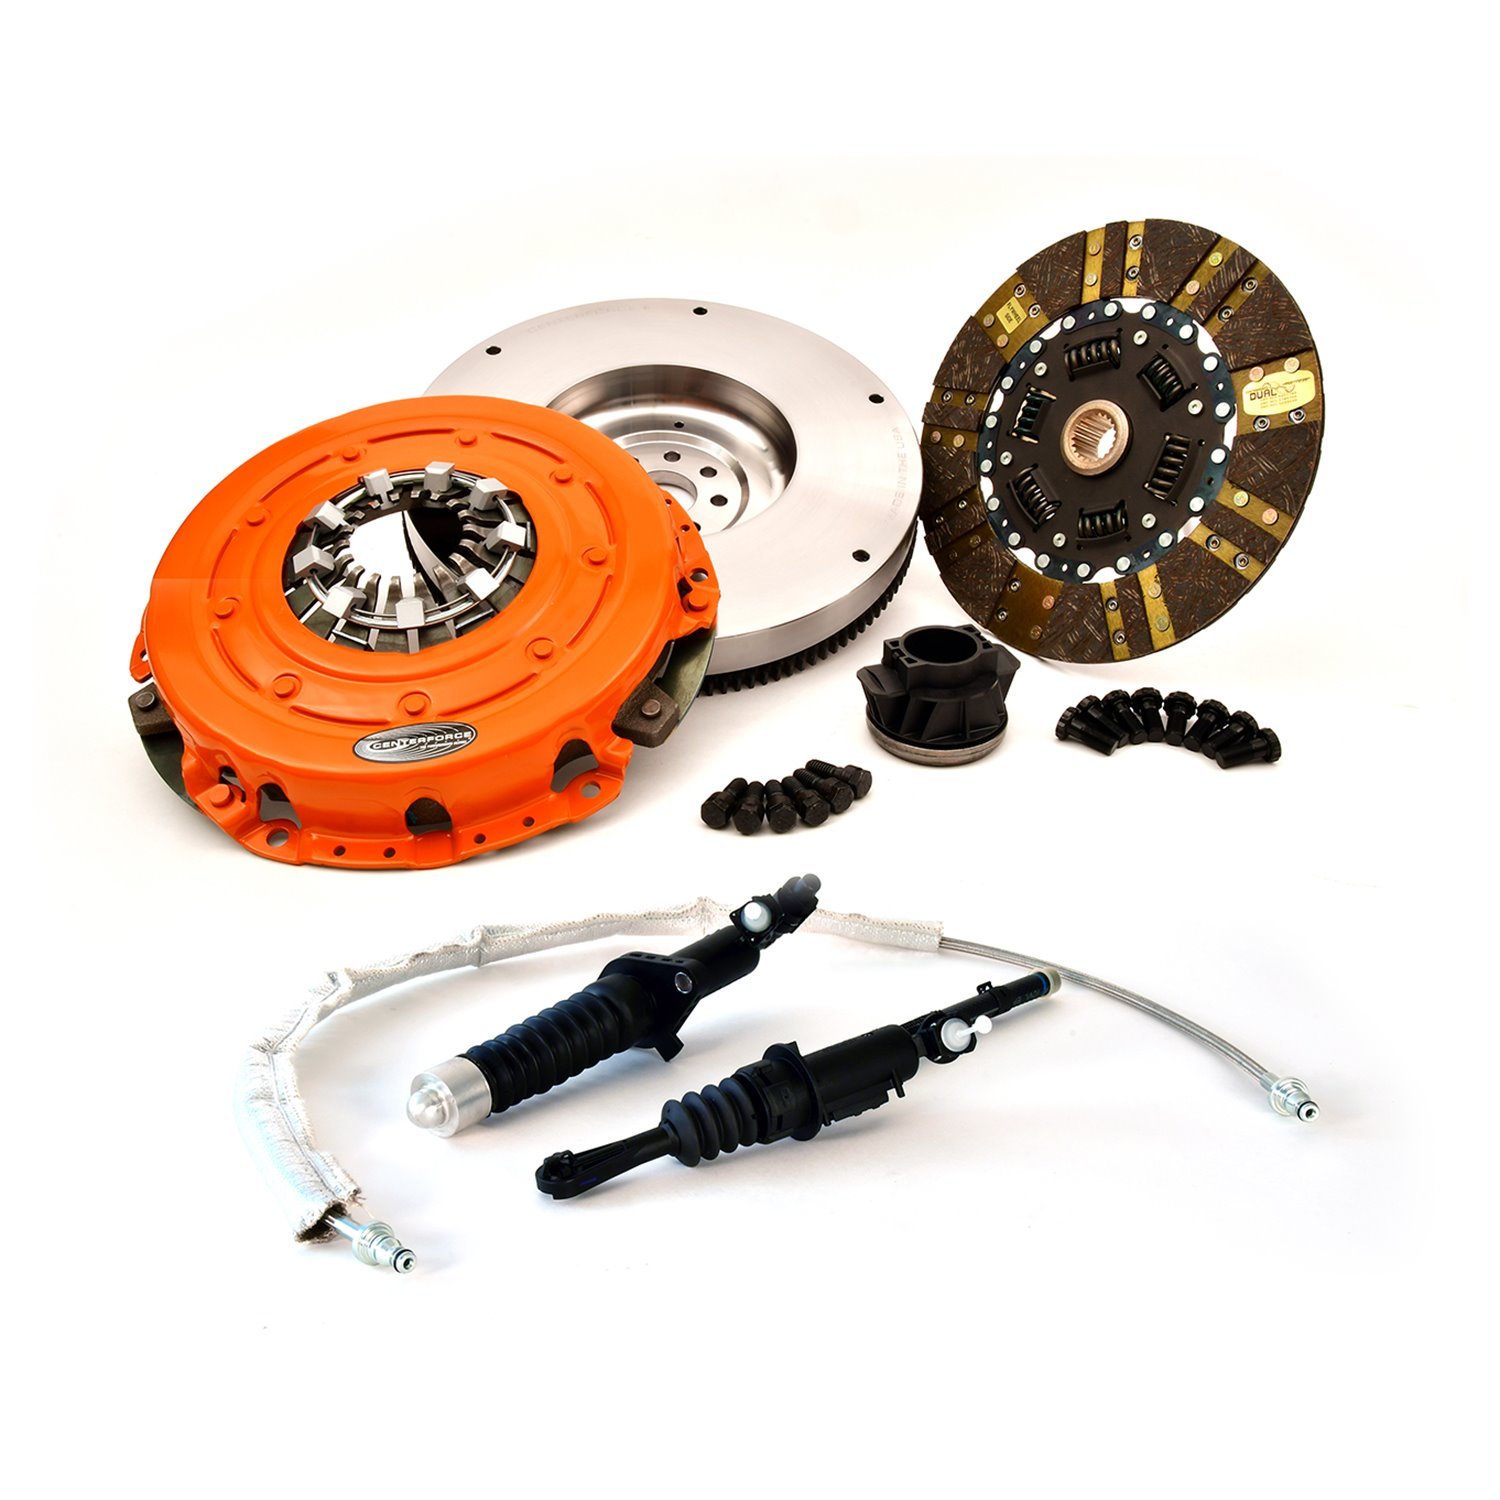 DF COMPLETE CLUTCH KIT